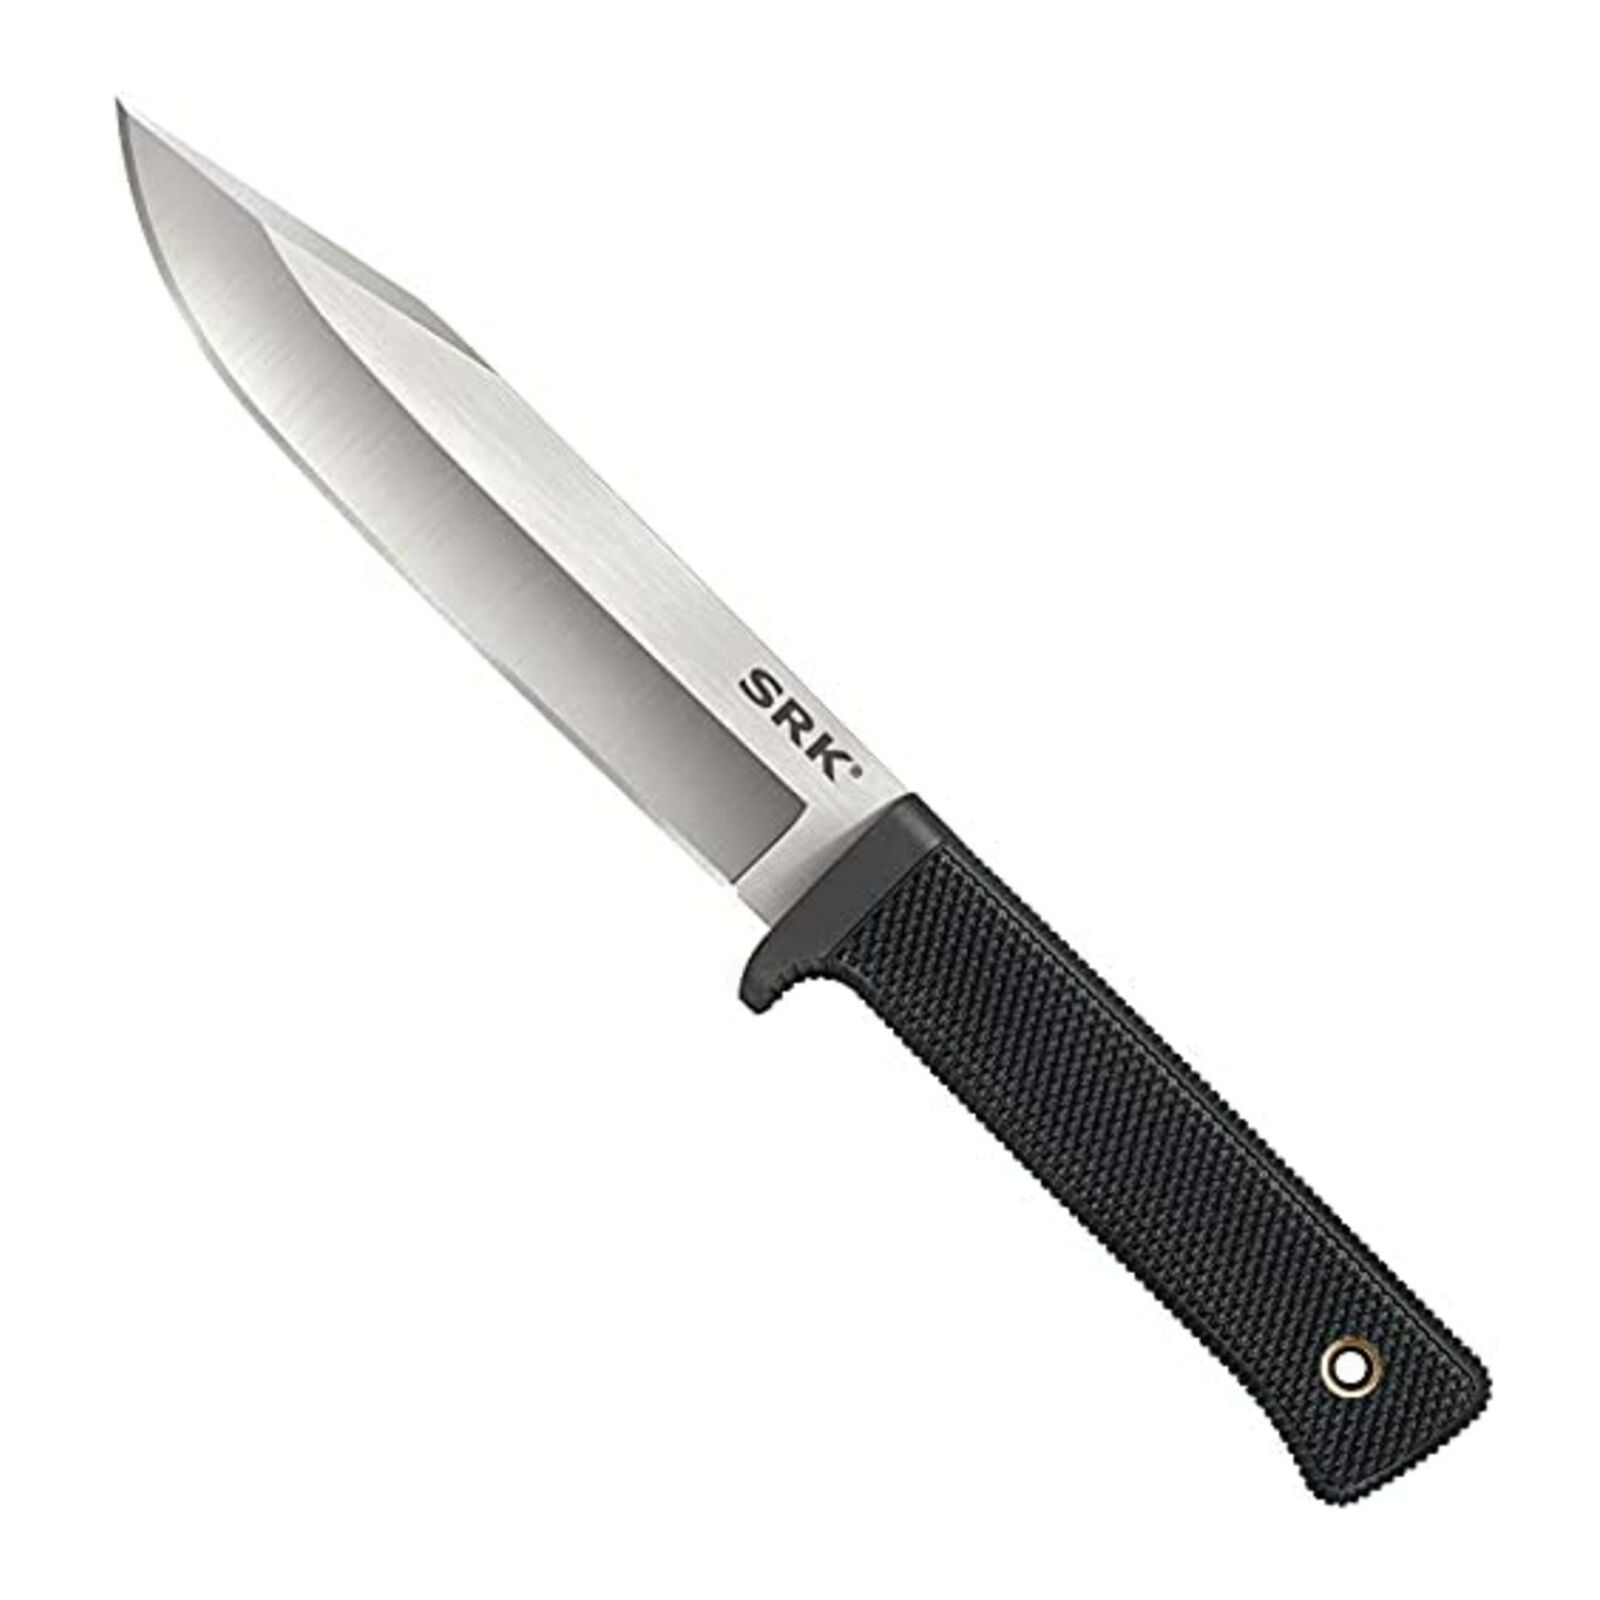 Cold Steel SRK in 3V 10 3/4 Overall 6 Blade 5mm Thick